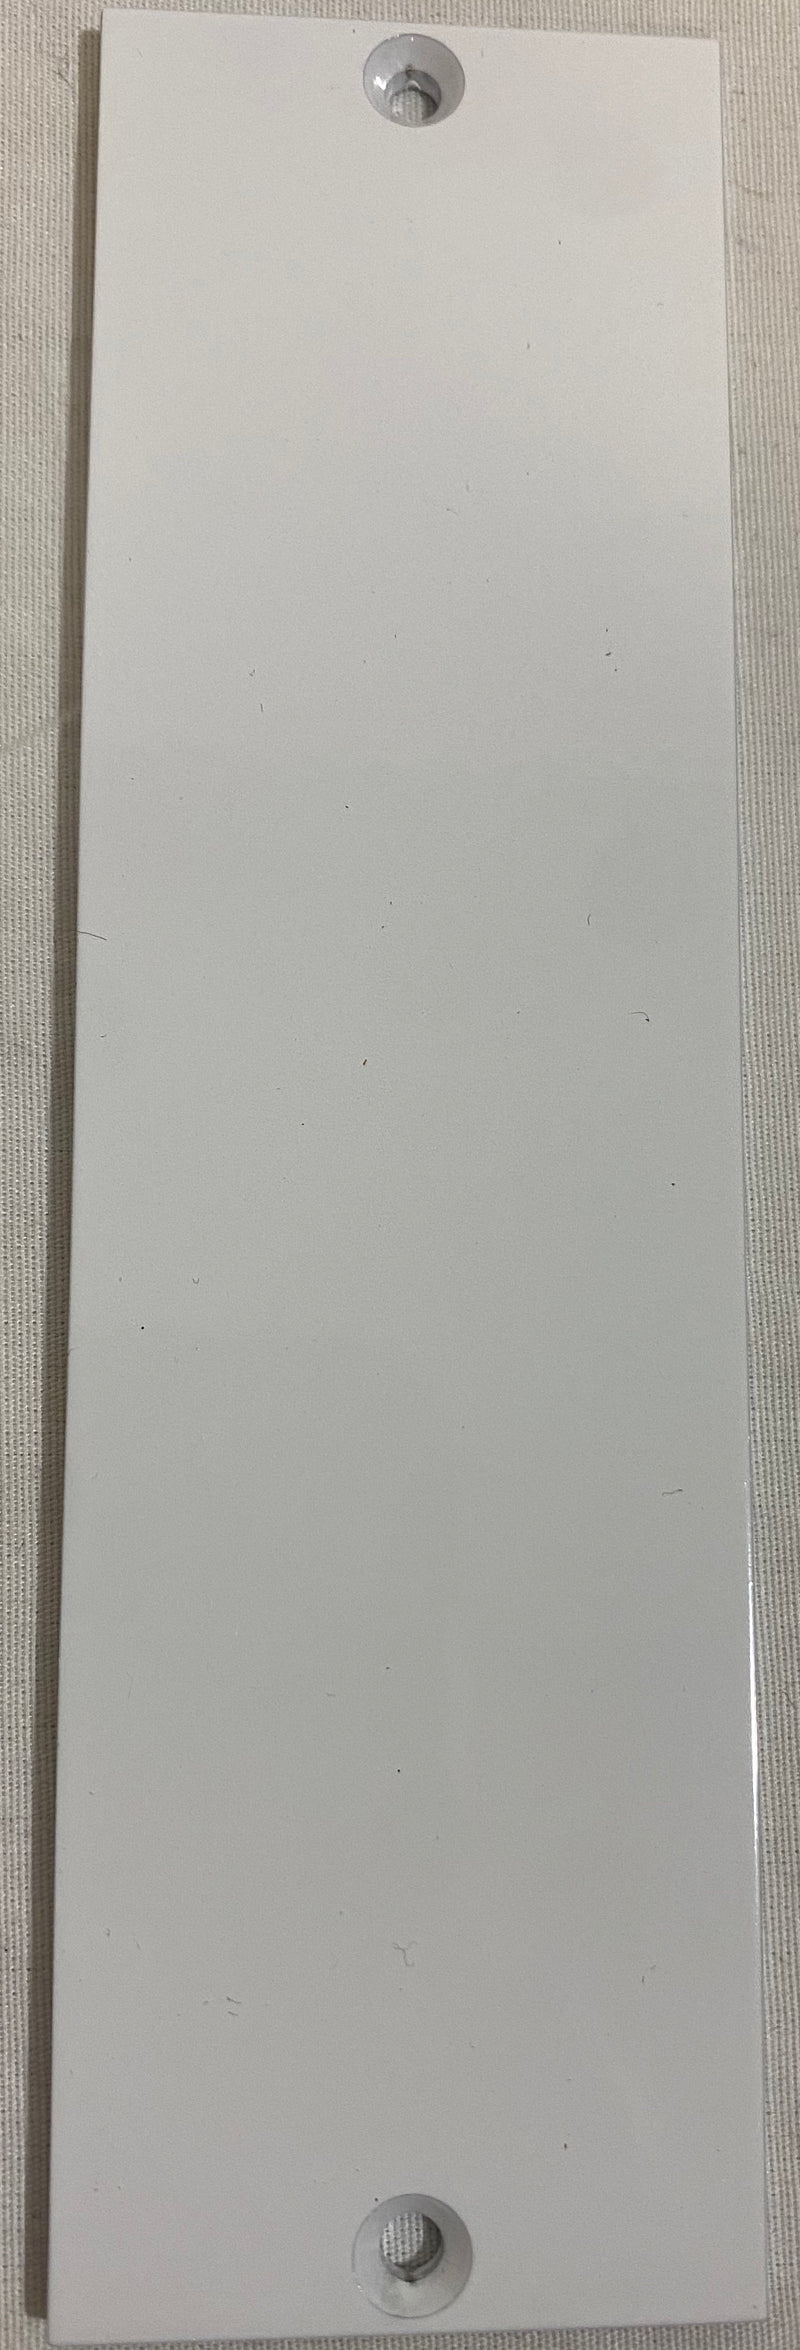 New Fredenstein White Blank Panel - Blank Panel for 500 Series Chassis.